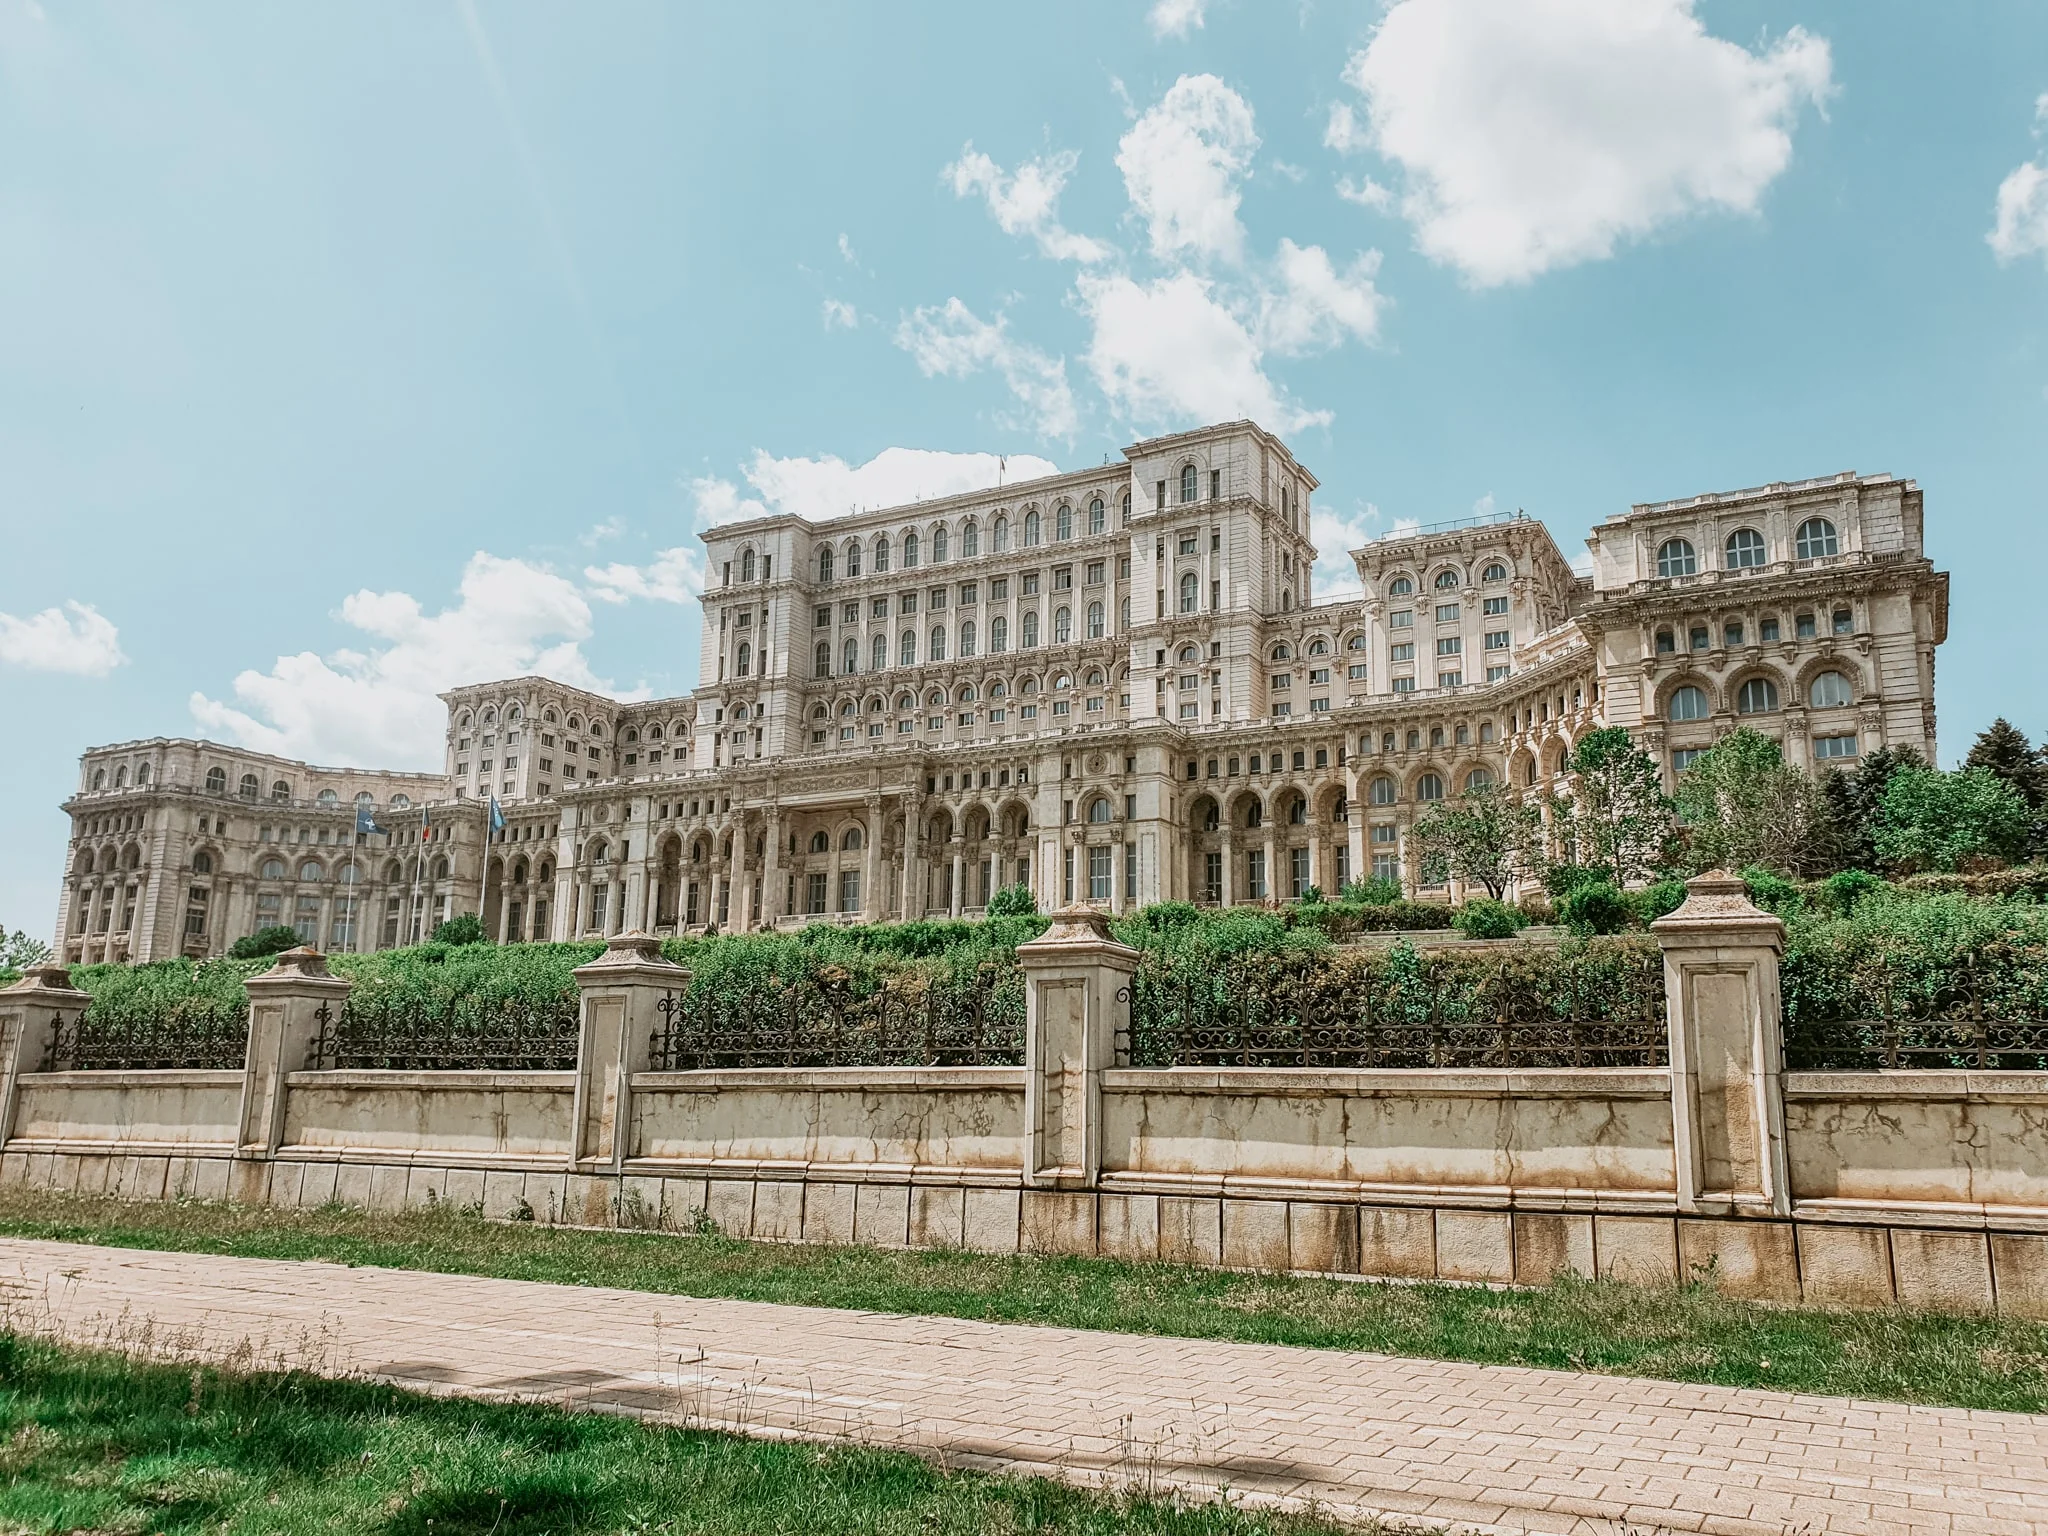 What are some common phrases I should learn before visiting Bucharest?